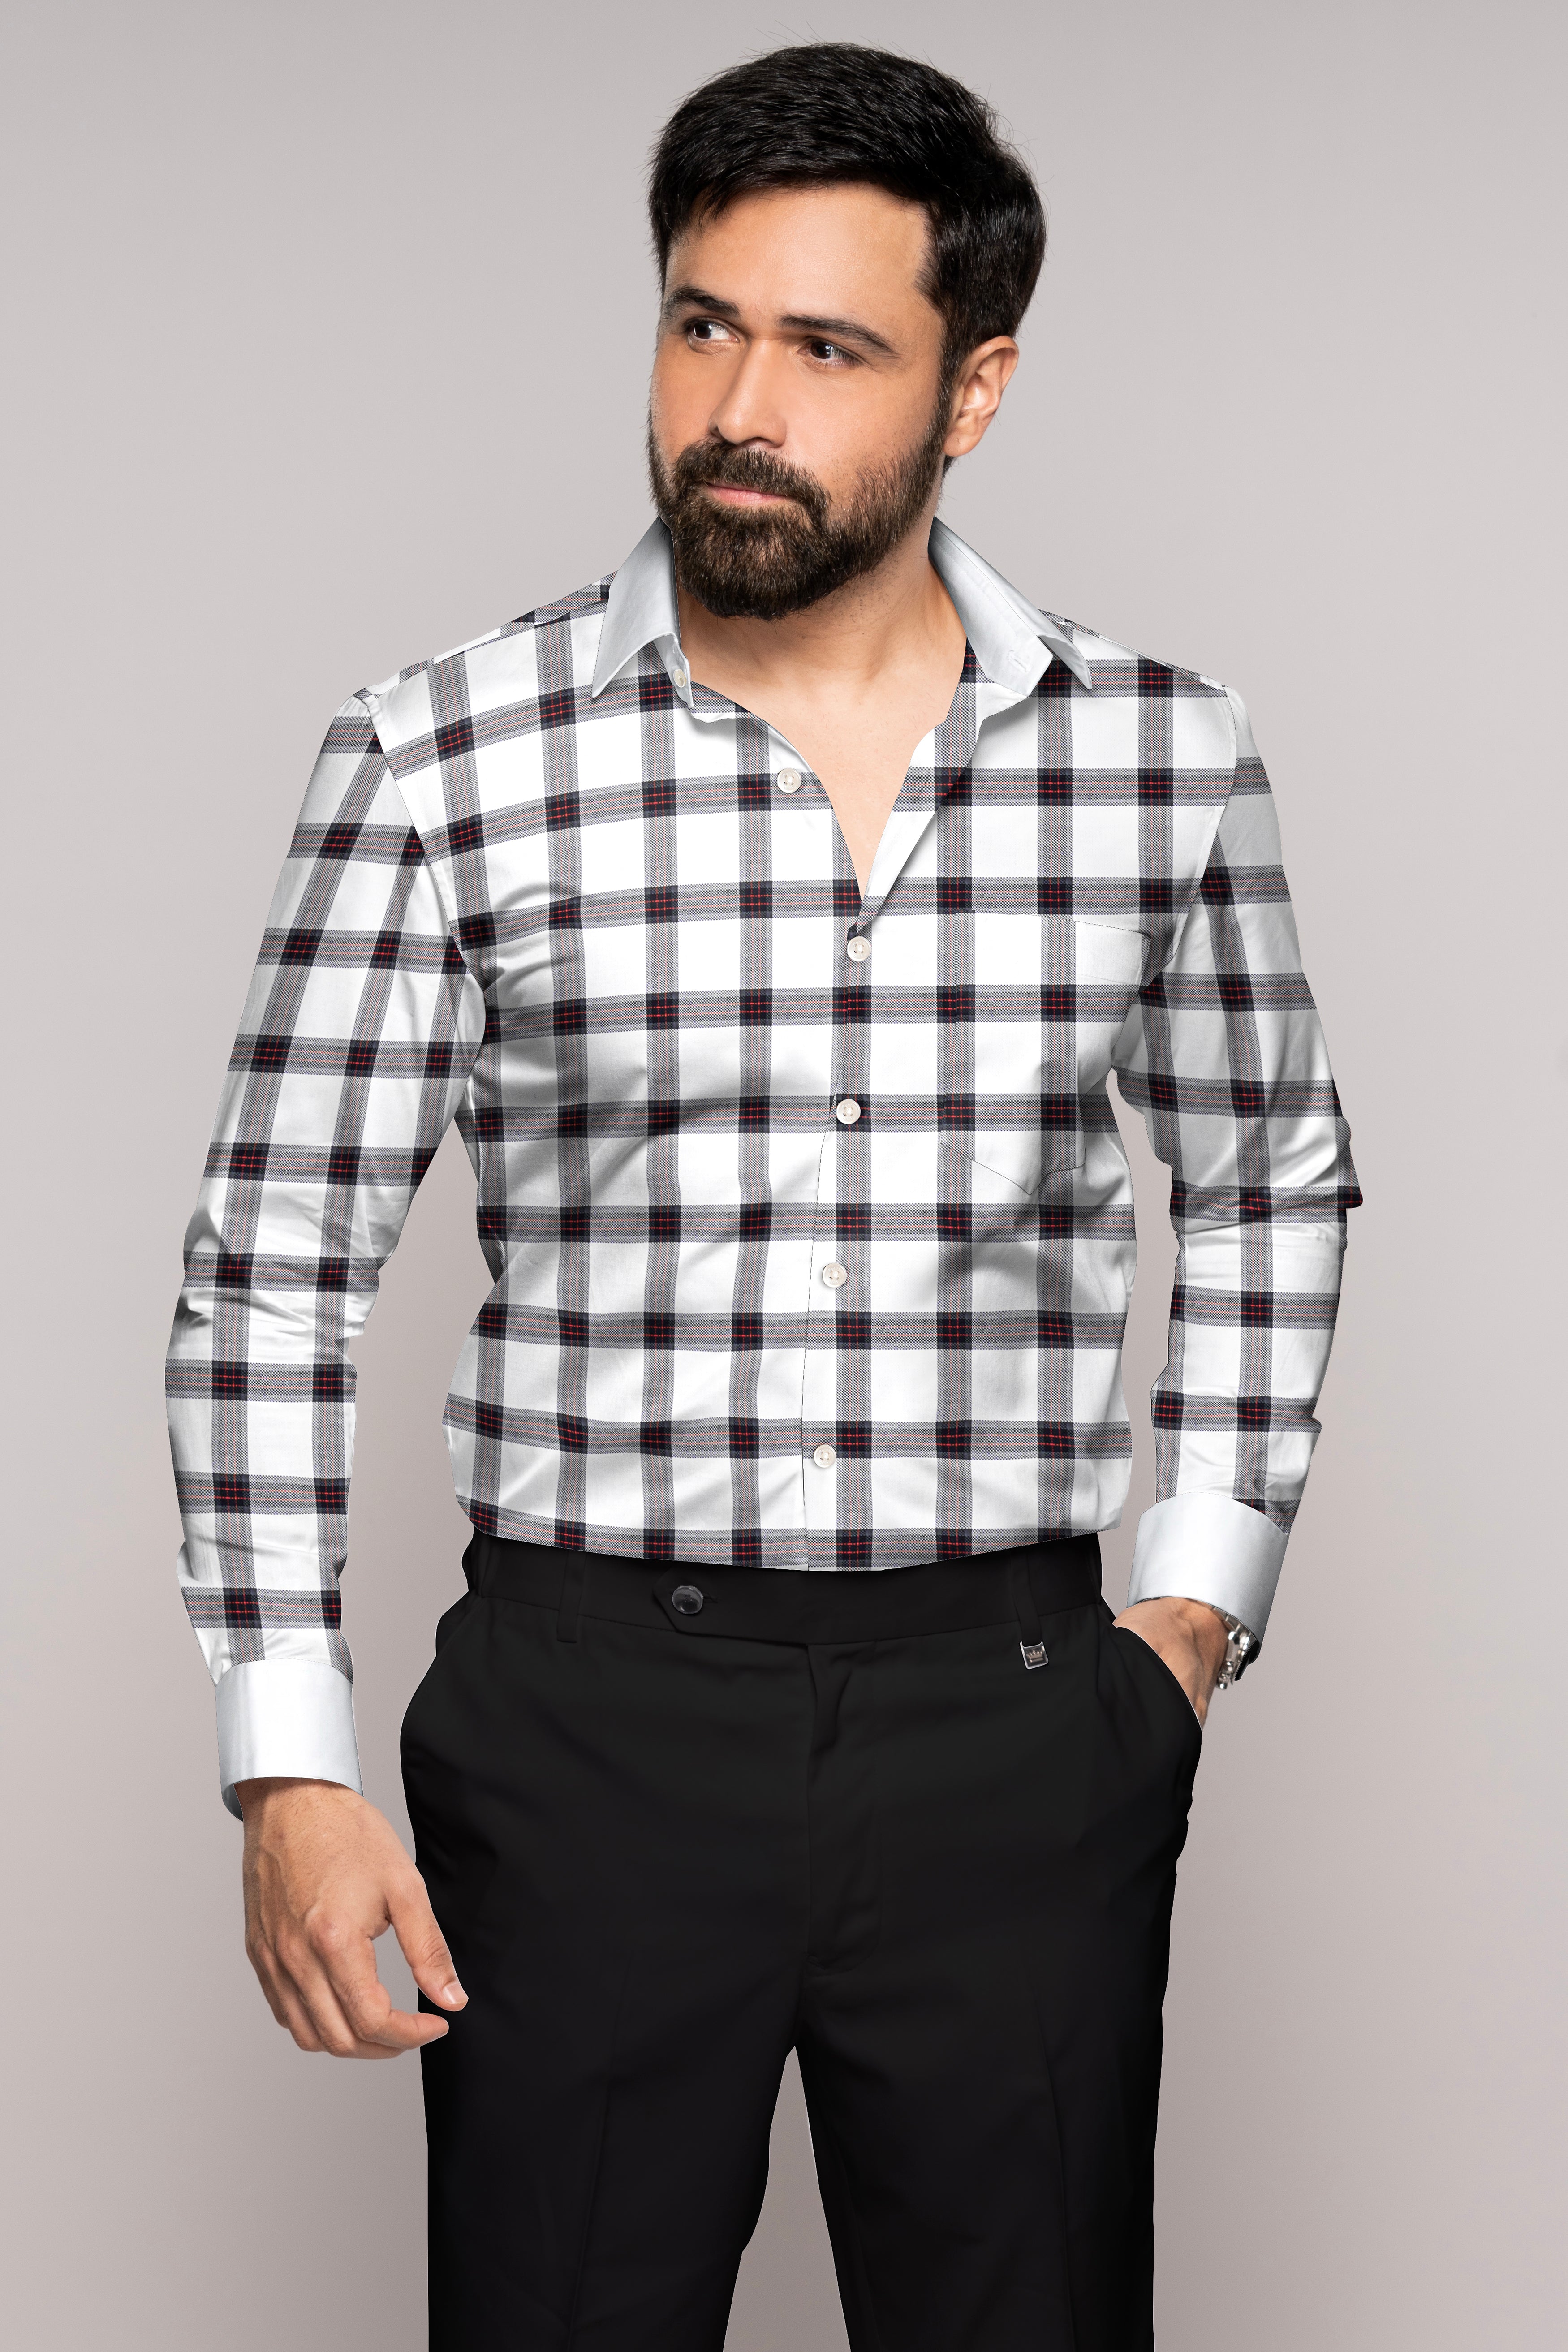 Bright White and Black Plaid Dobby Textured with White Cuffs and Collar Premium Giza Cotton Shirt